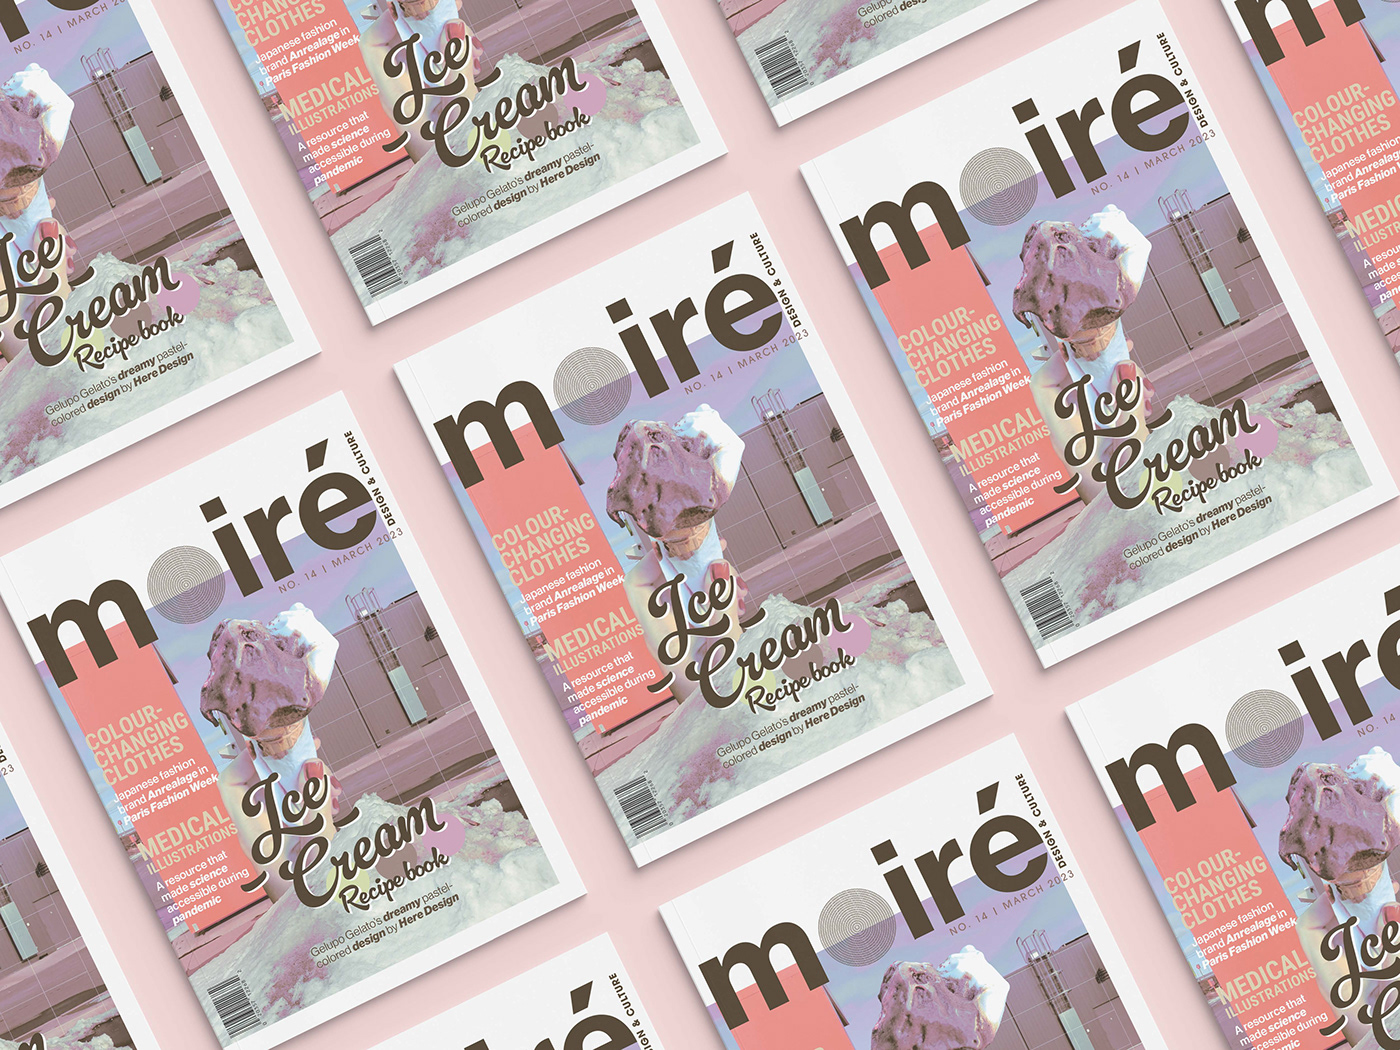 Magazine design lettering pastel colors table of contents Layout magazine InDesign